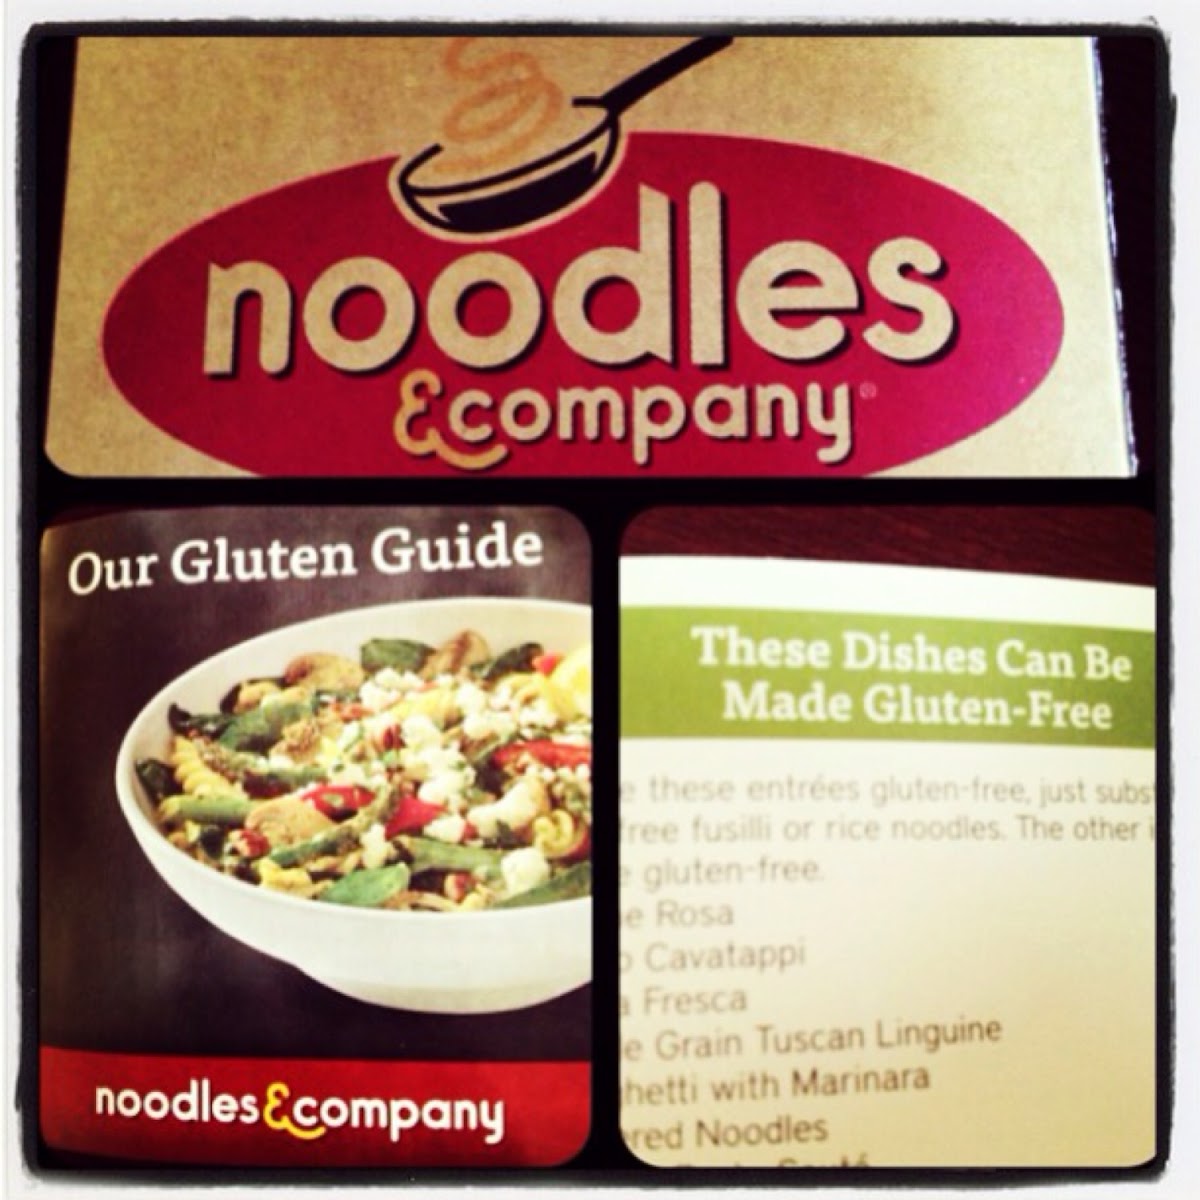 Noodles and Company gluten-free menu